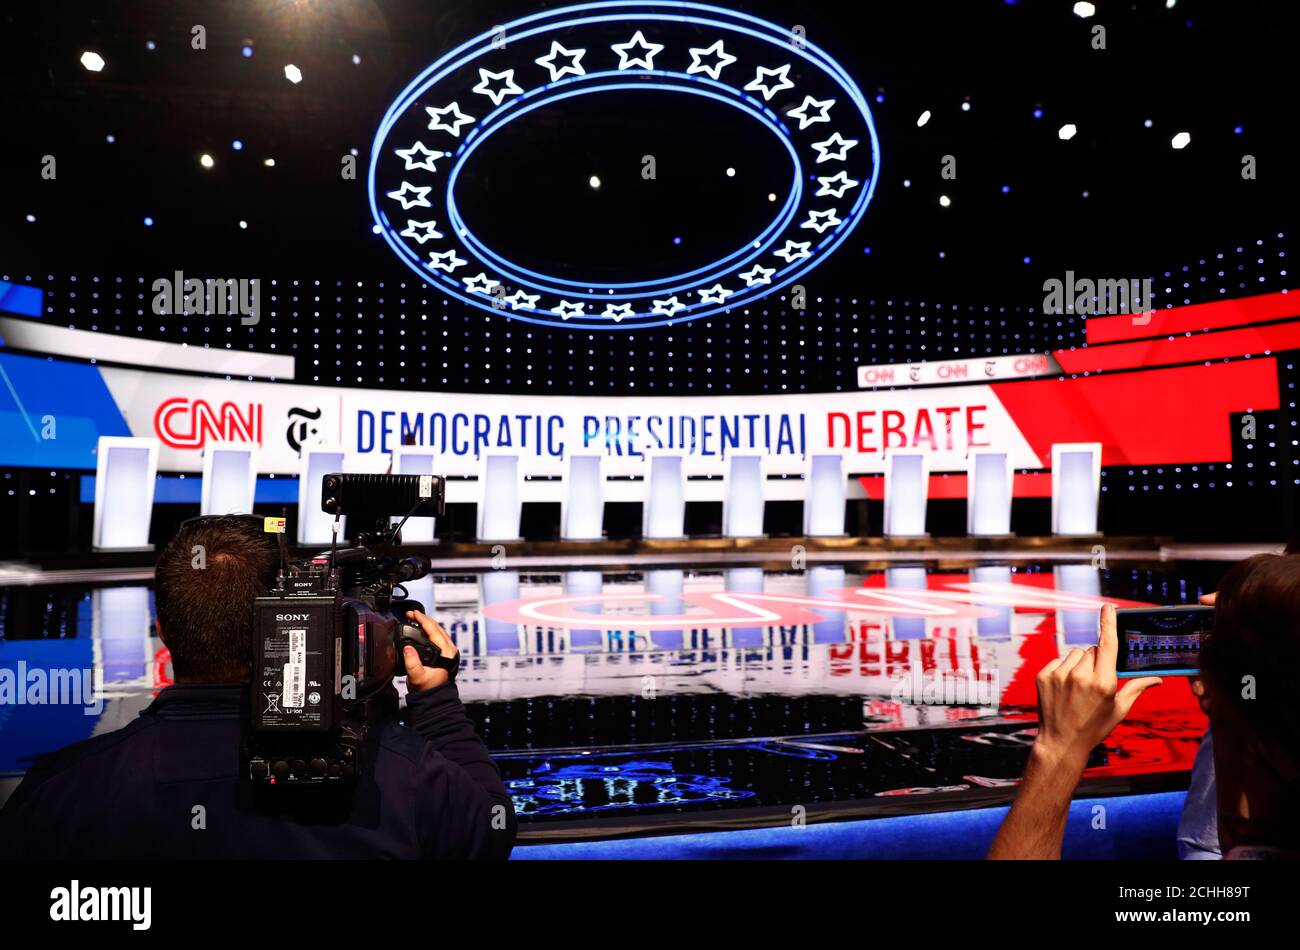 Photographers take pictures of the 12 candidates' podiums standing at the ready before the fourth U.S. Democratic presidential candidates 2020 election debate at Otterbein University in Westerville, Ohio U.S. October 15, 2019.   REUTERS/Jim Bourg Stock Photo